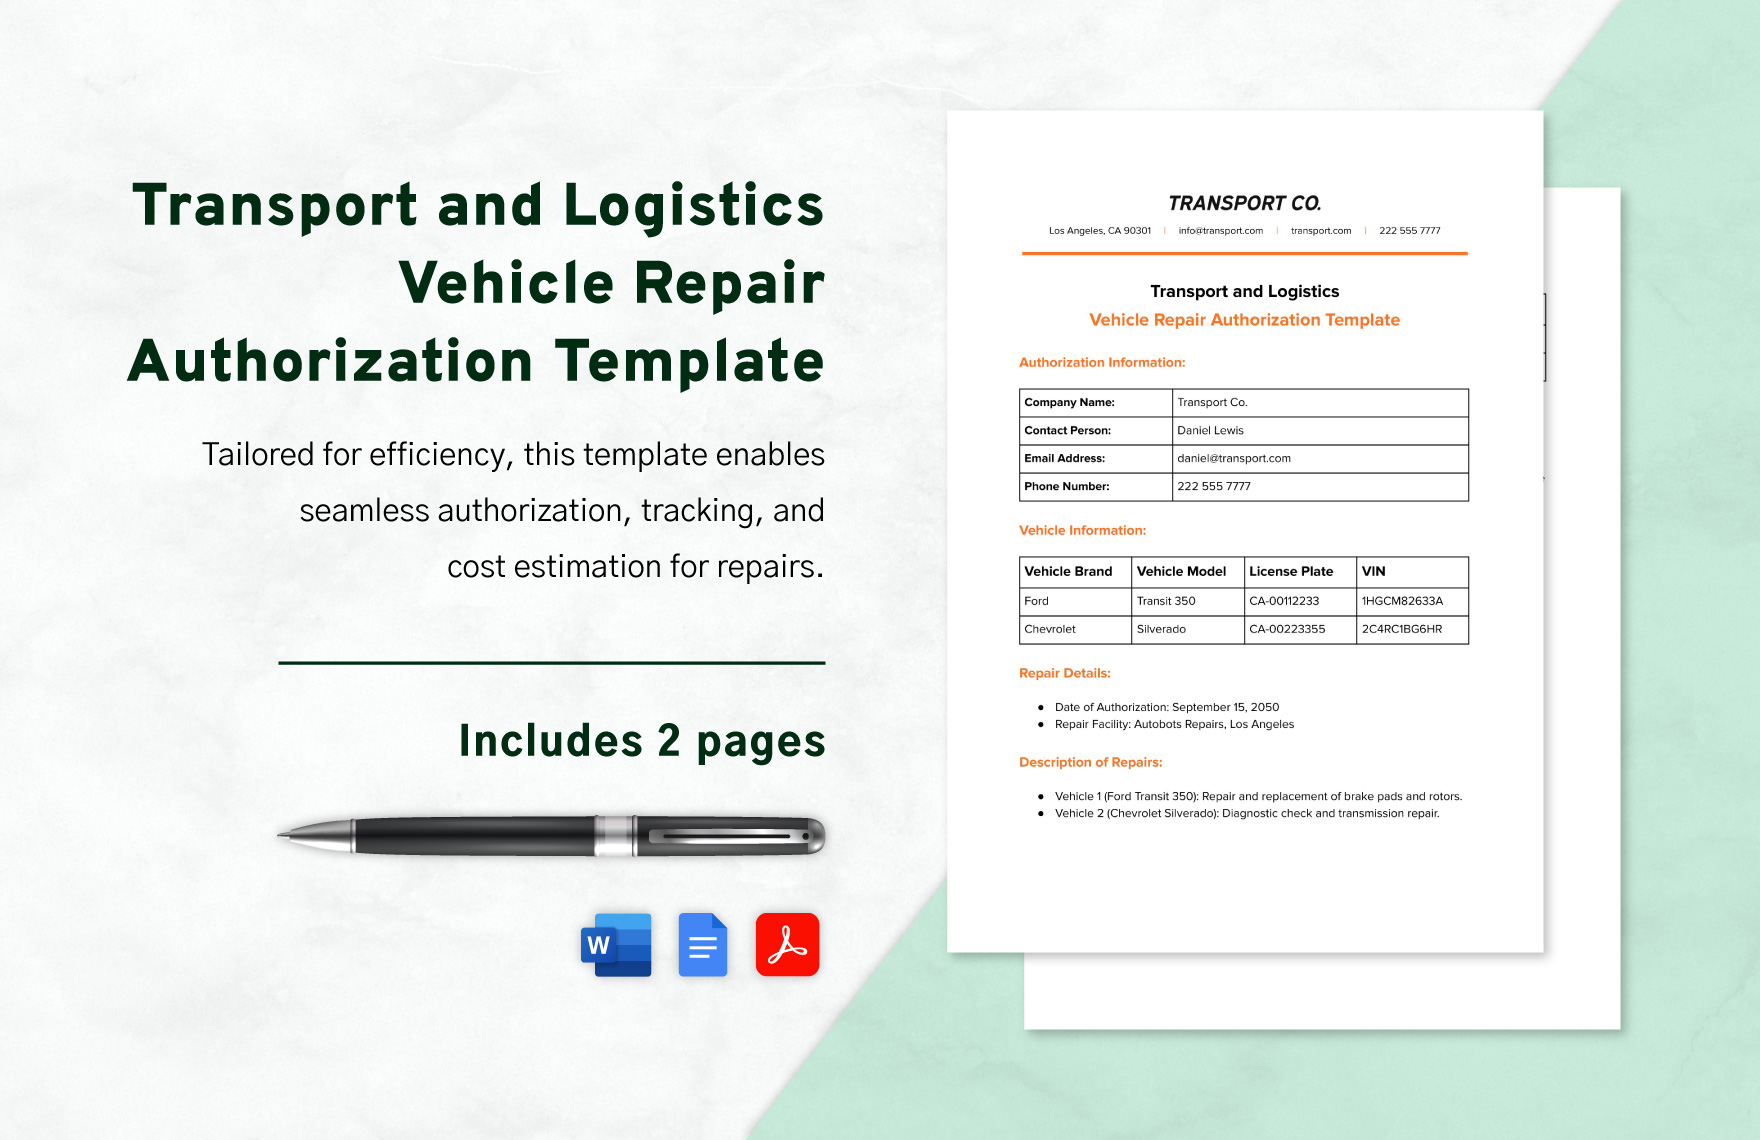 Transport and Logistics Vehicle Repair Authorization Template in Word, Google Docs, PDF